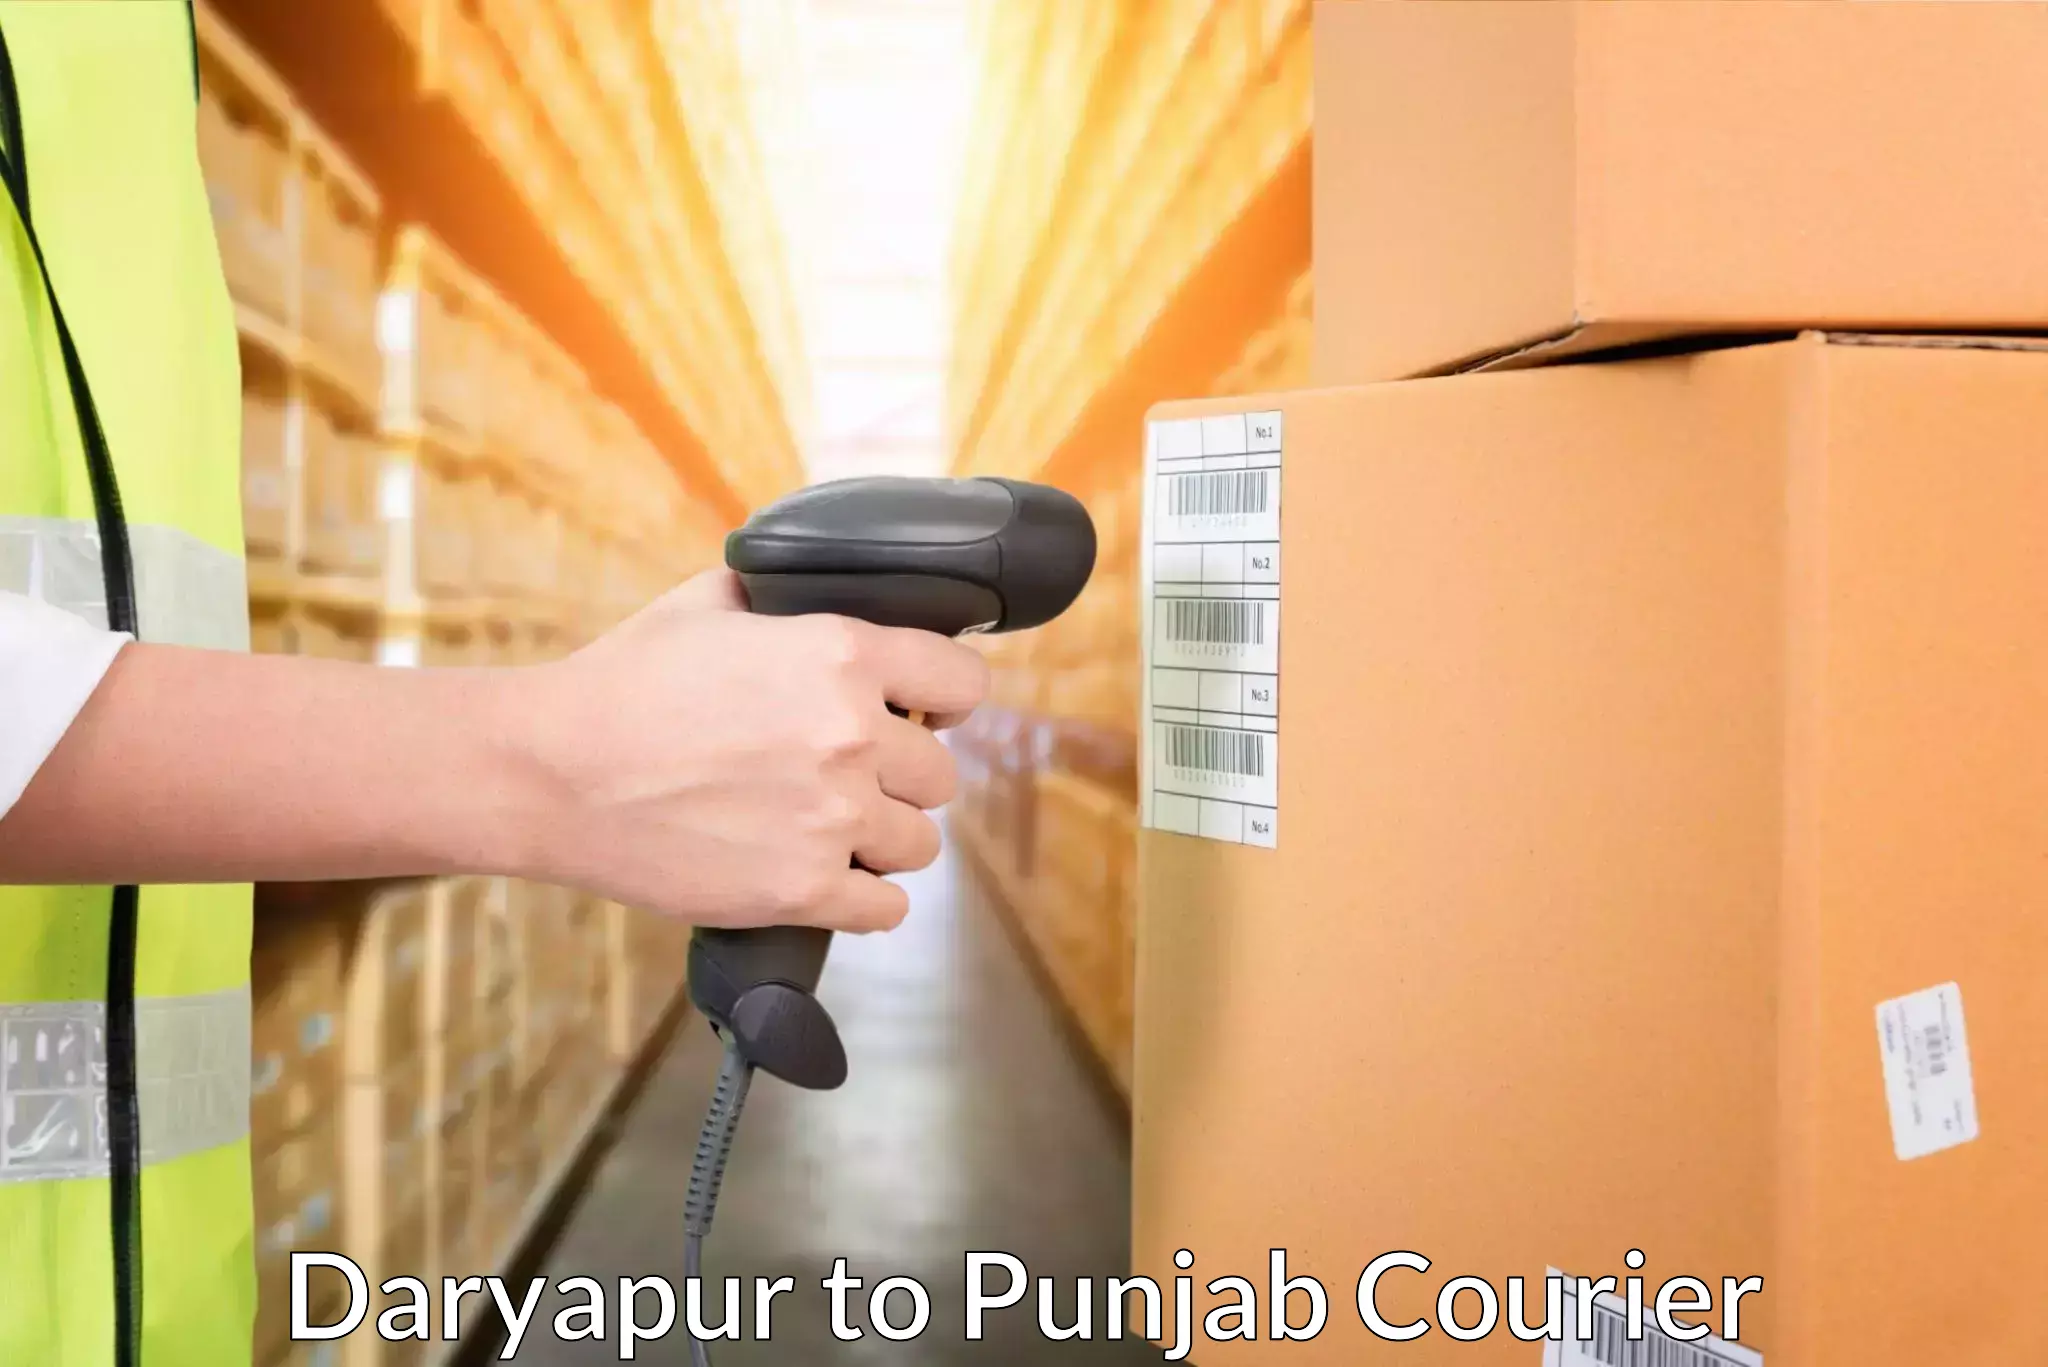 State-of-the-art courier technology Daryapur to Nakodar